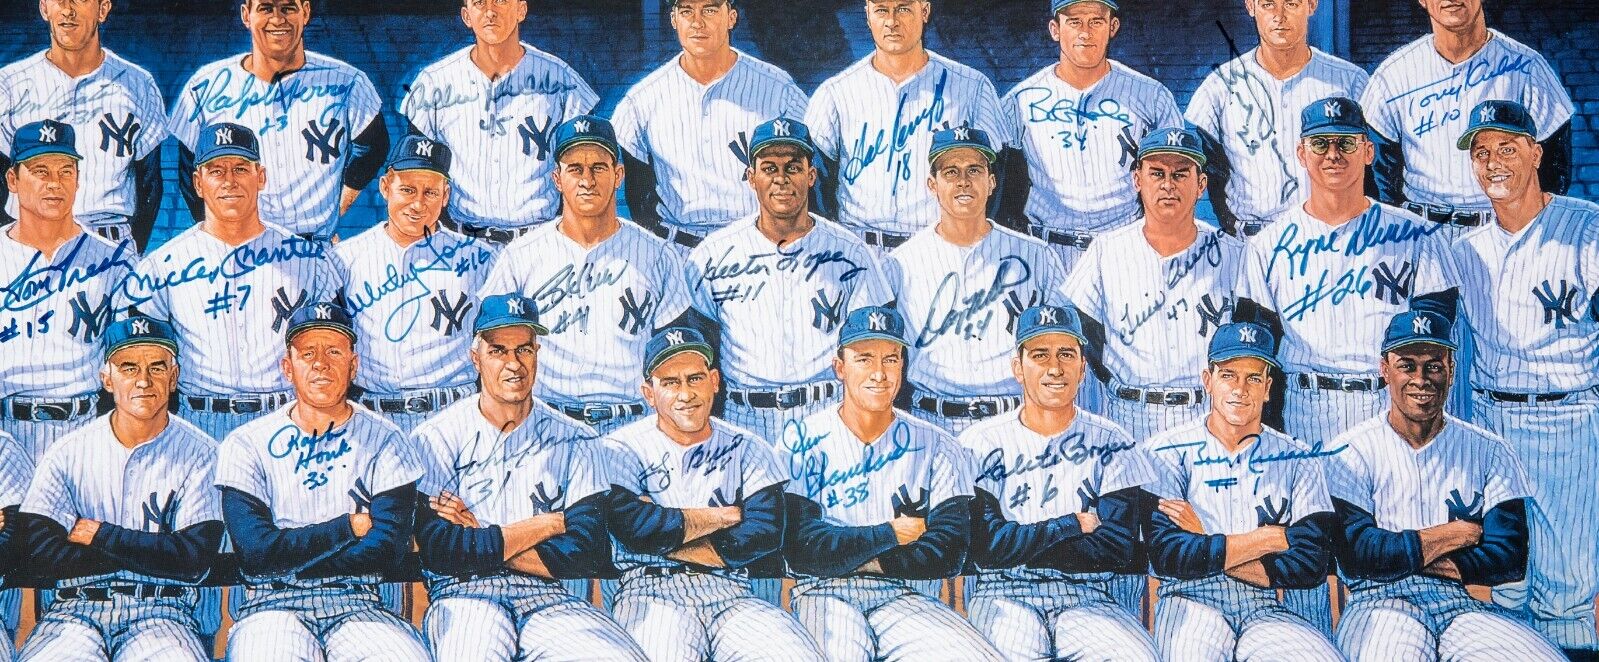 1961 New York Yankees WS Champs Team Signed Large Photo Mickey Mantle JSA COA